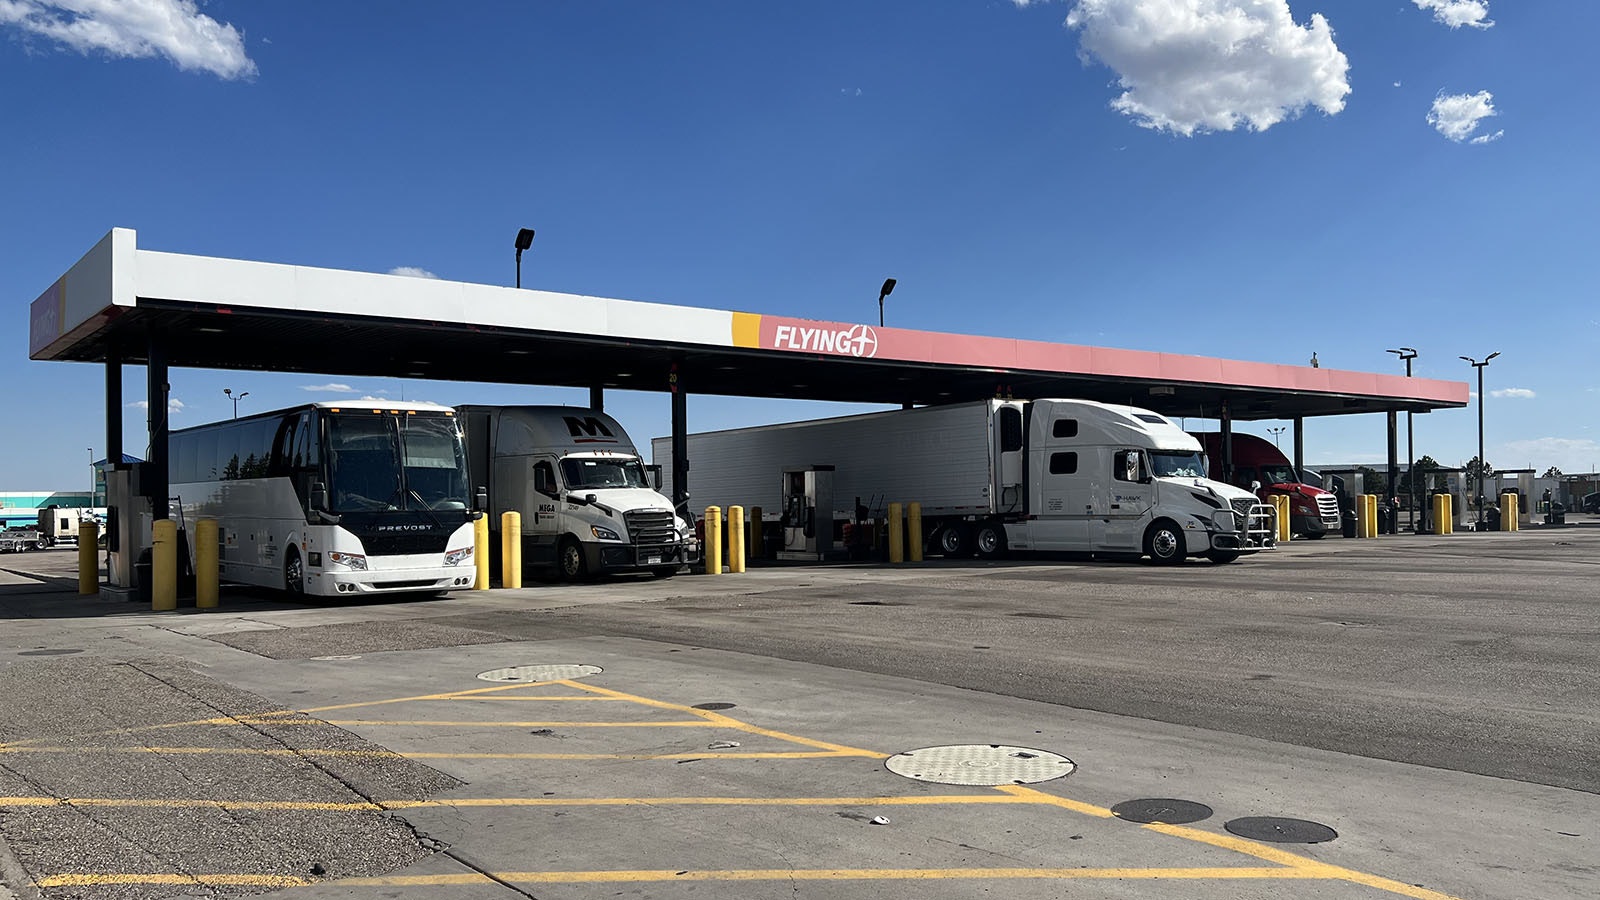 The Flying J truck stop at Exit 7 of Interstate 25 in south Cheyenne is one of the busiest in the area for truckers to fuel up.